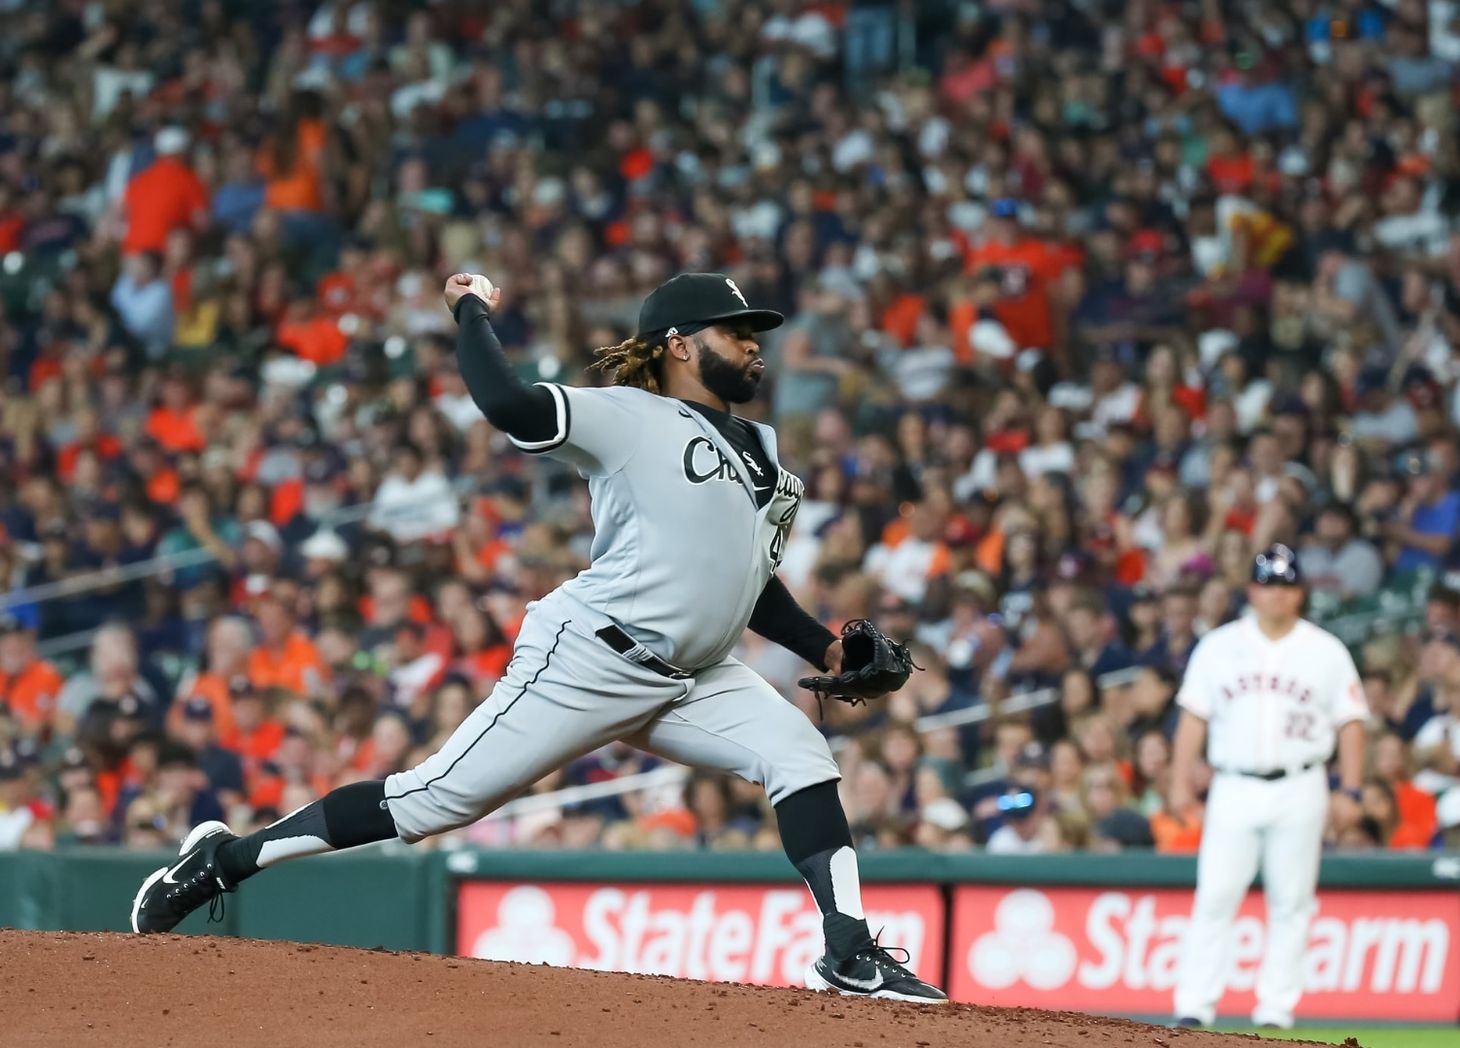 Cueto, López combine for 3-hitter as Chisox down Astros 7-0